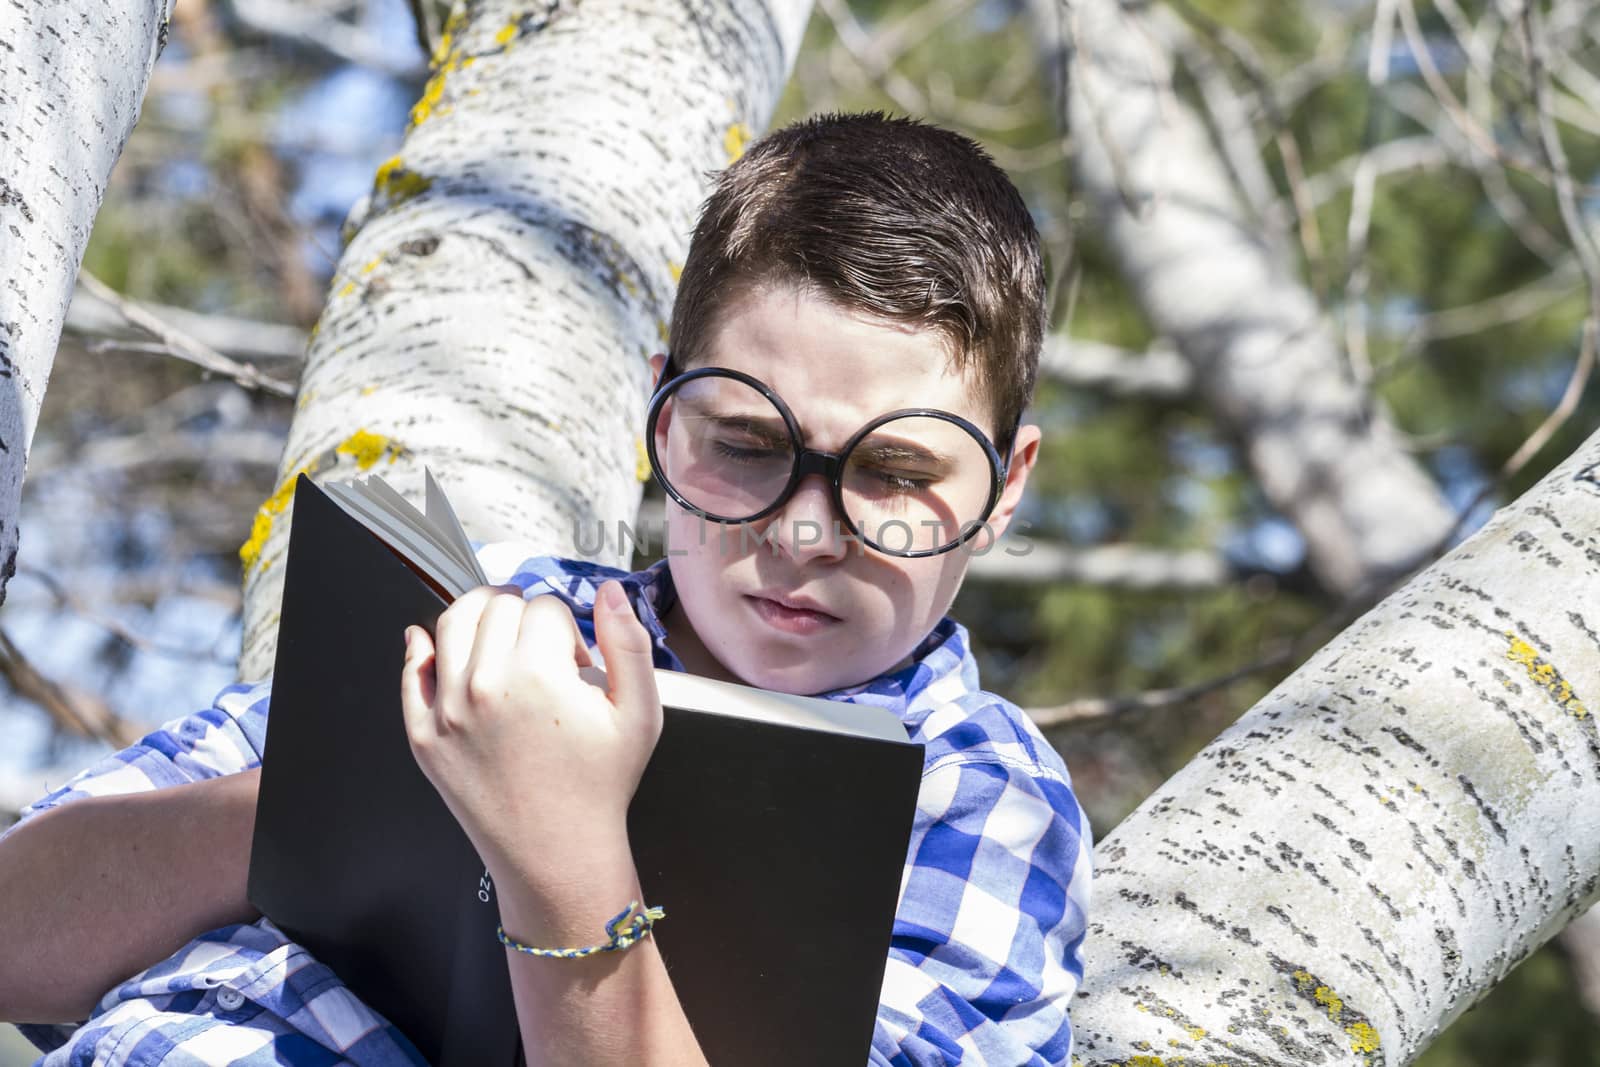 Student boy reading a book in the woods with shallow depth of fi by FernandoCortes